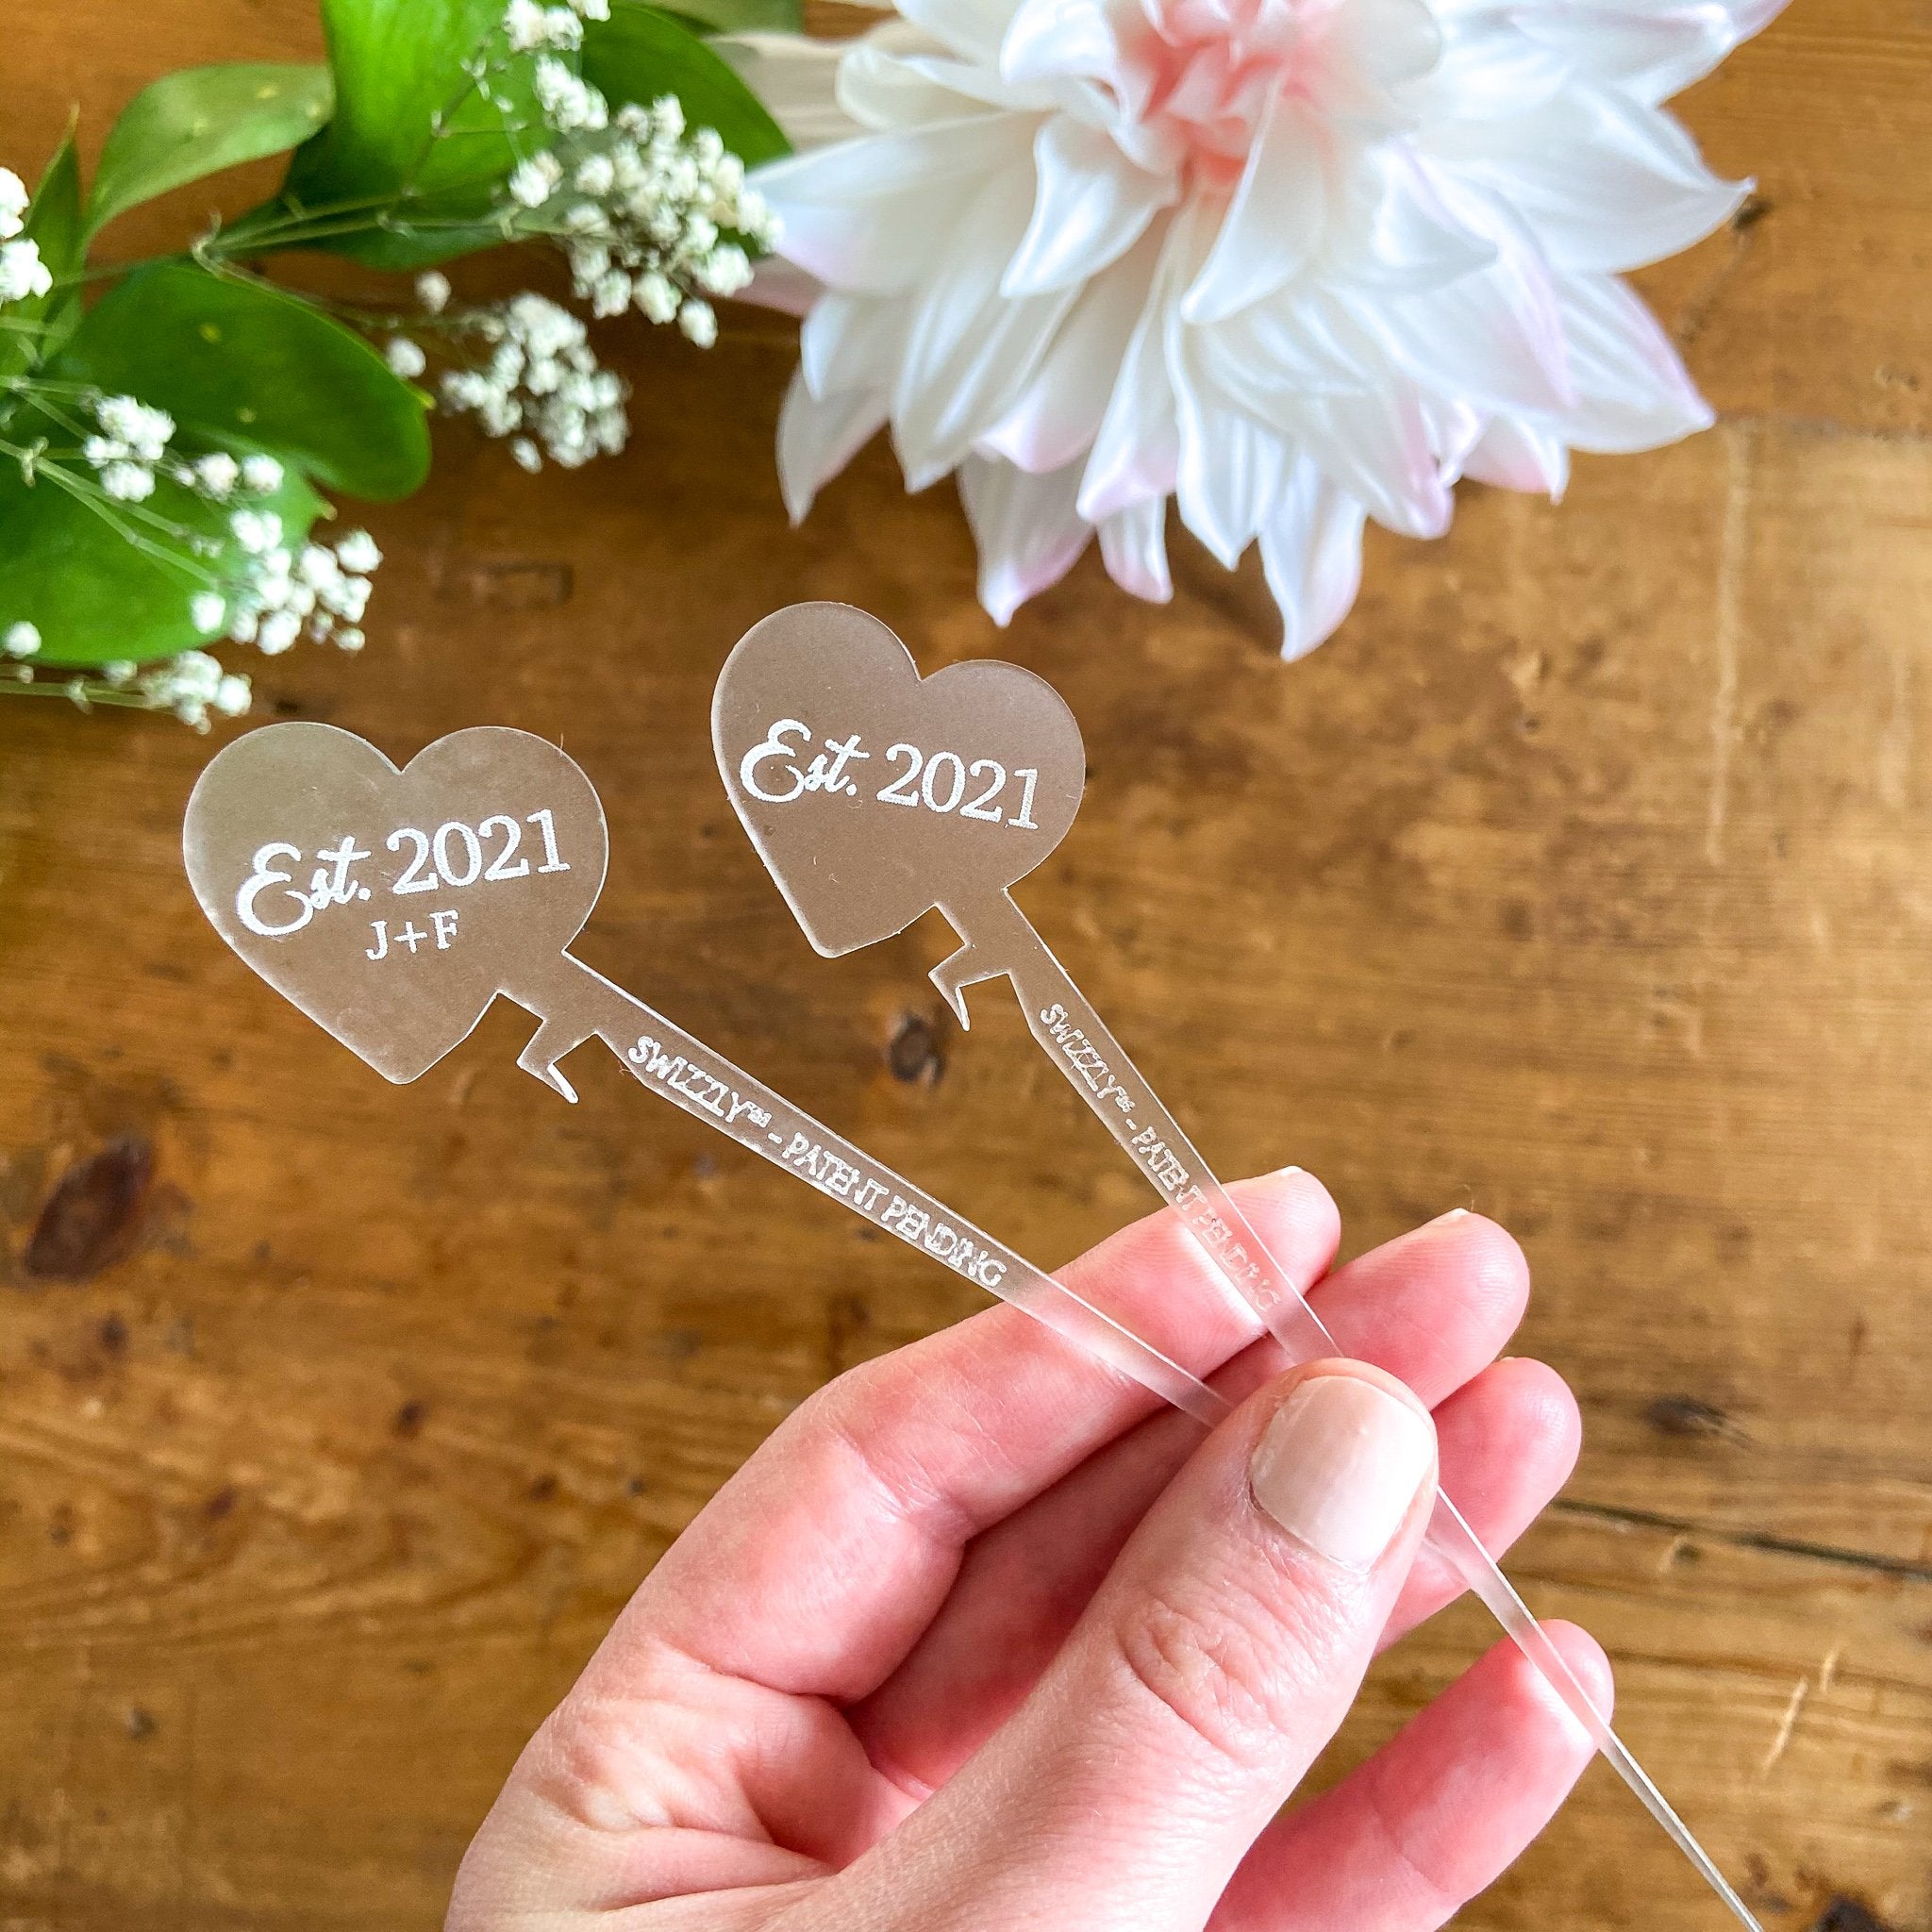 Personalized Name Drink Stirrers Cocktail Accessories Wedding